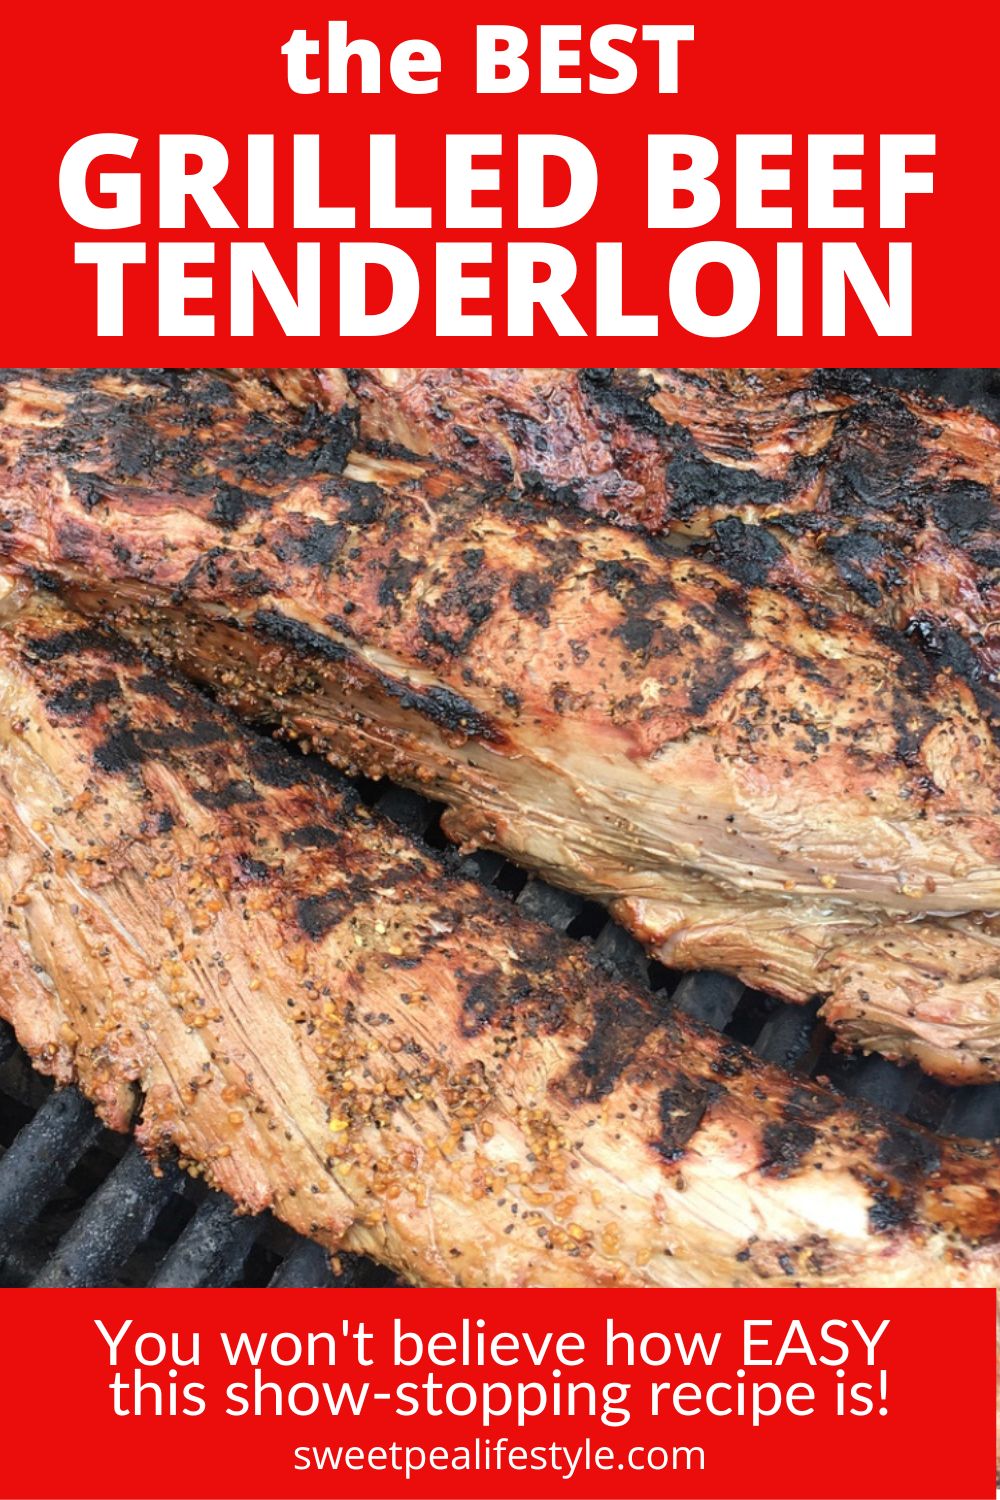 How to Grill the Best Grilled Beef Tenderloin Recipe